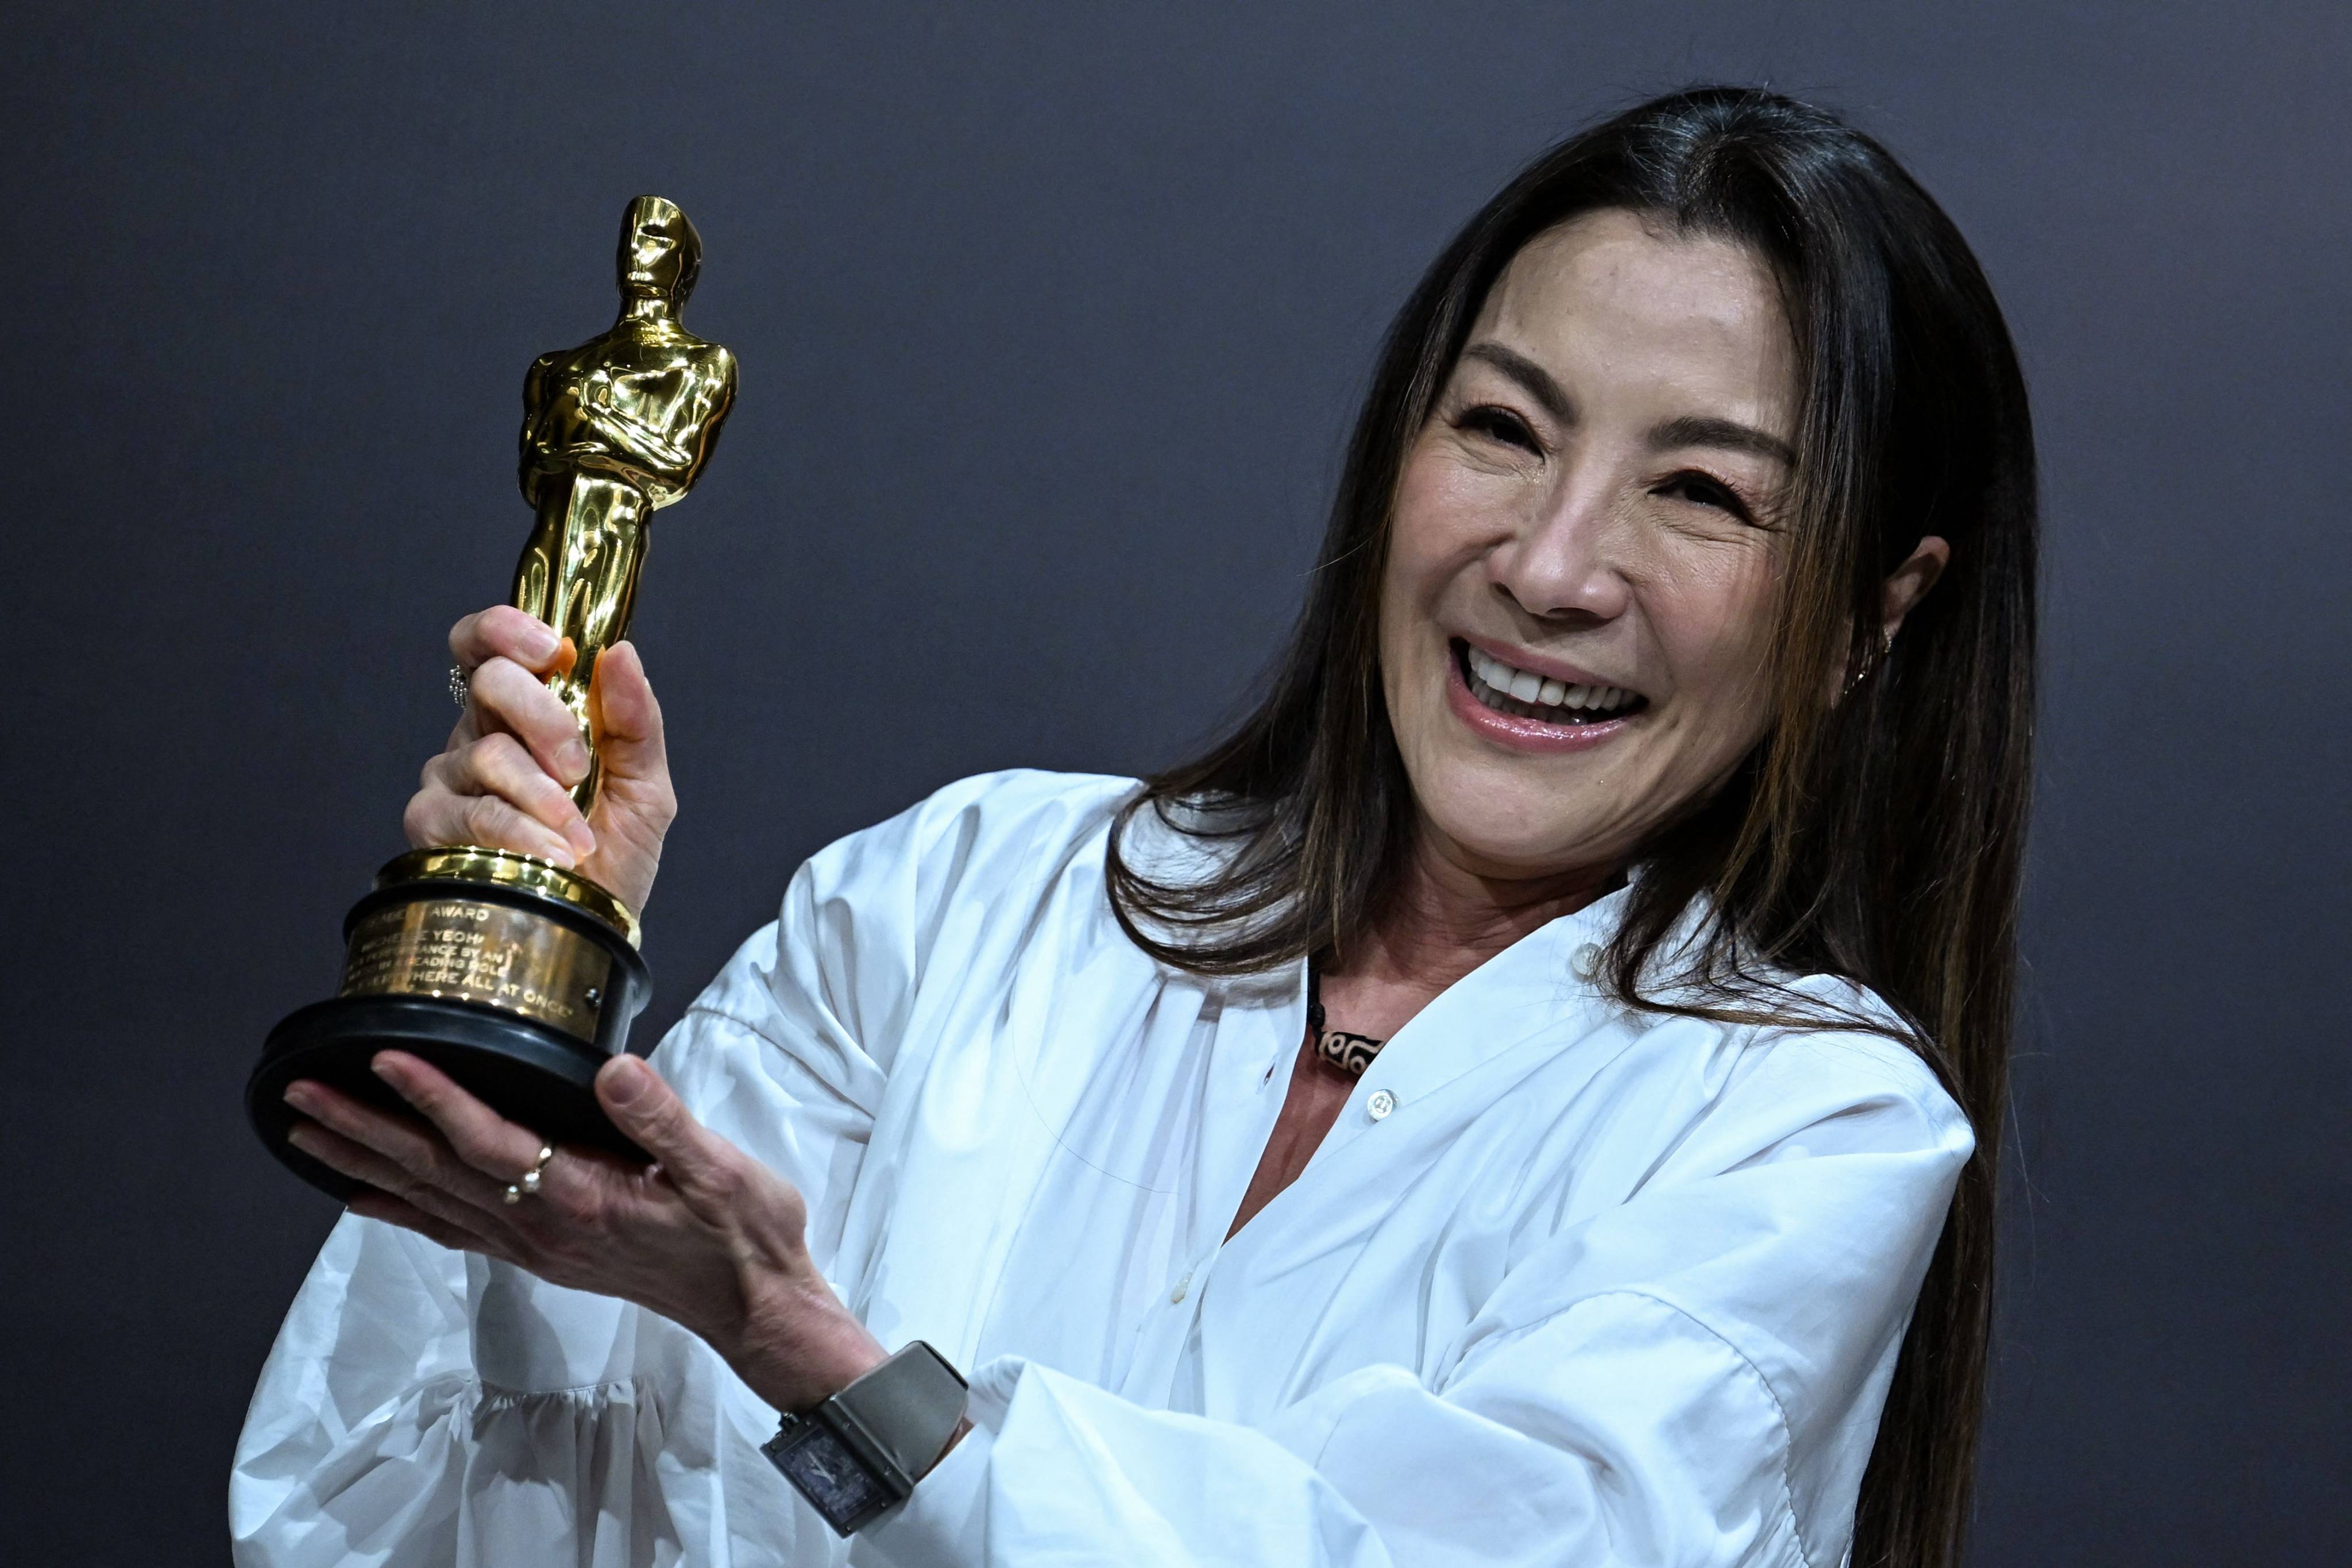 Malaysian actress Michelle Yeoh poses with the Oscar for Best Actress in a Leading Role for “Everything Everywhere All at Once” during a press conference in Kuala Lumpur on April 18, 2023. Photo: AFP